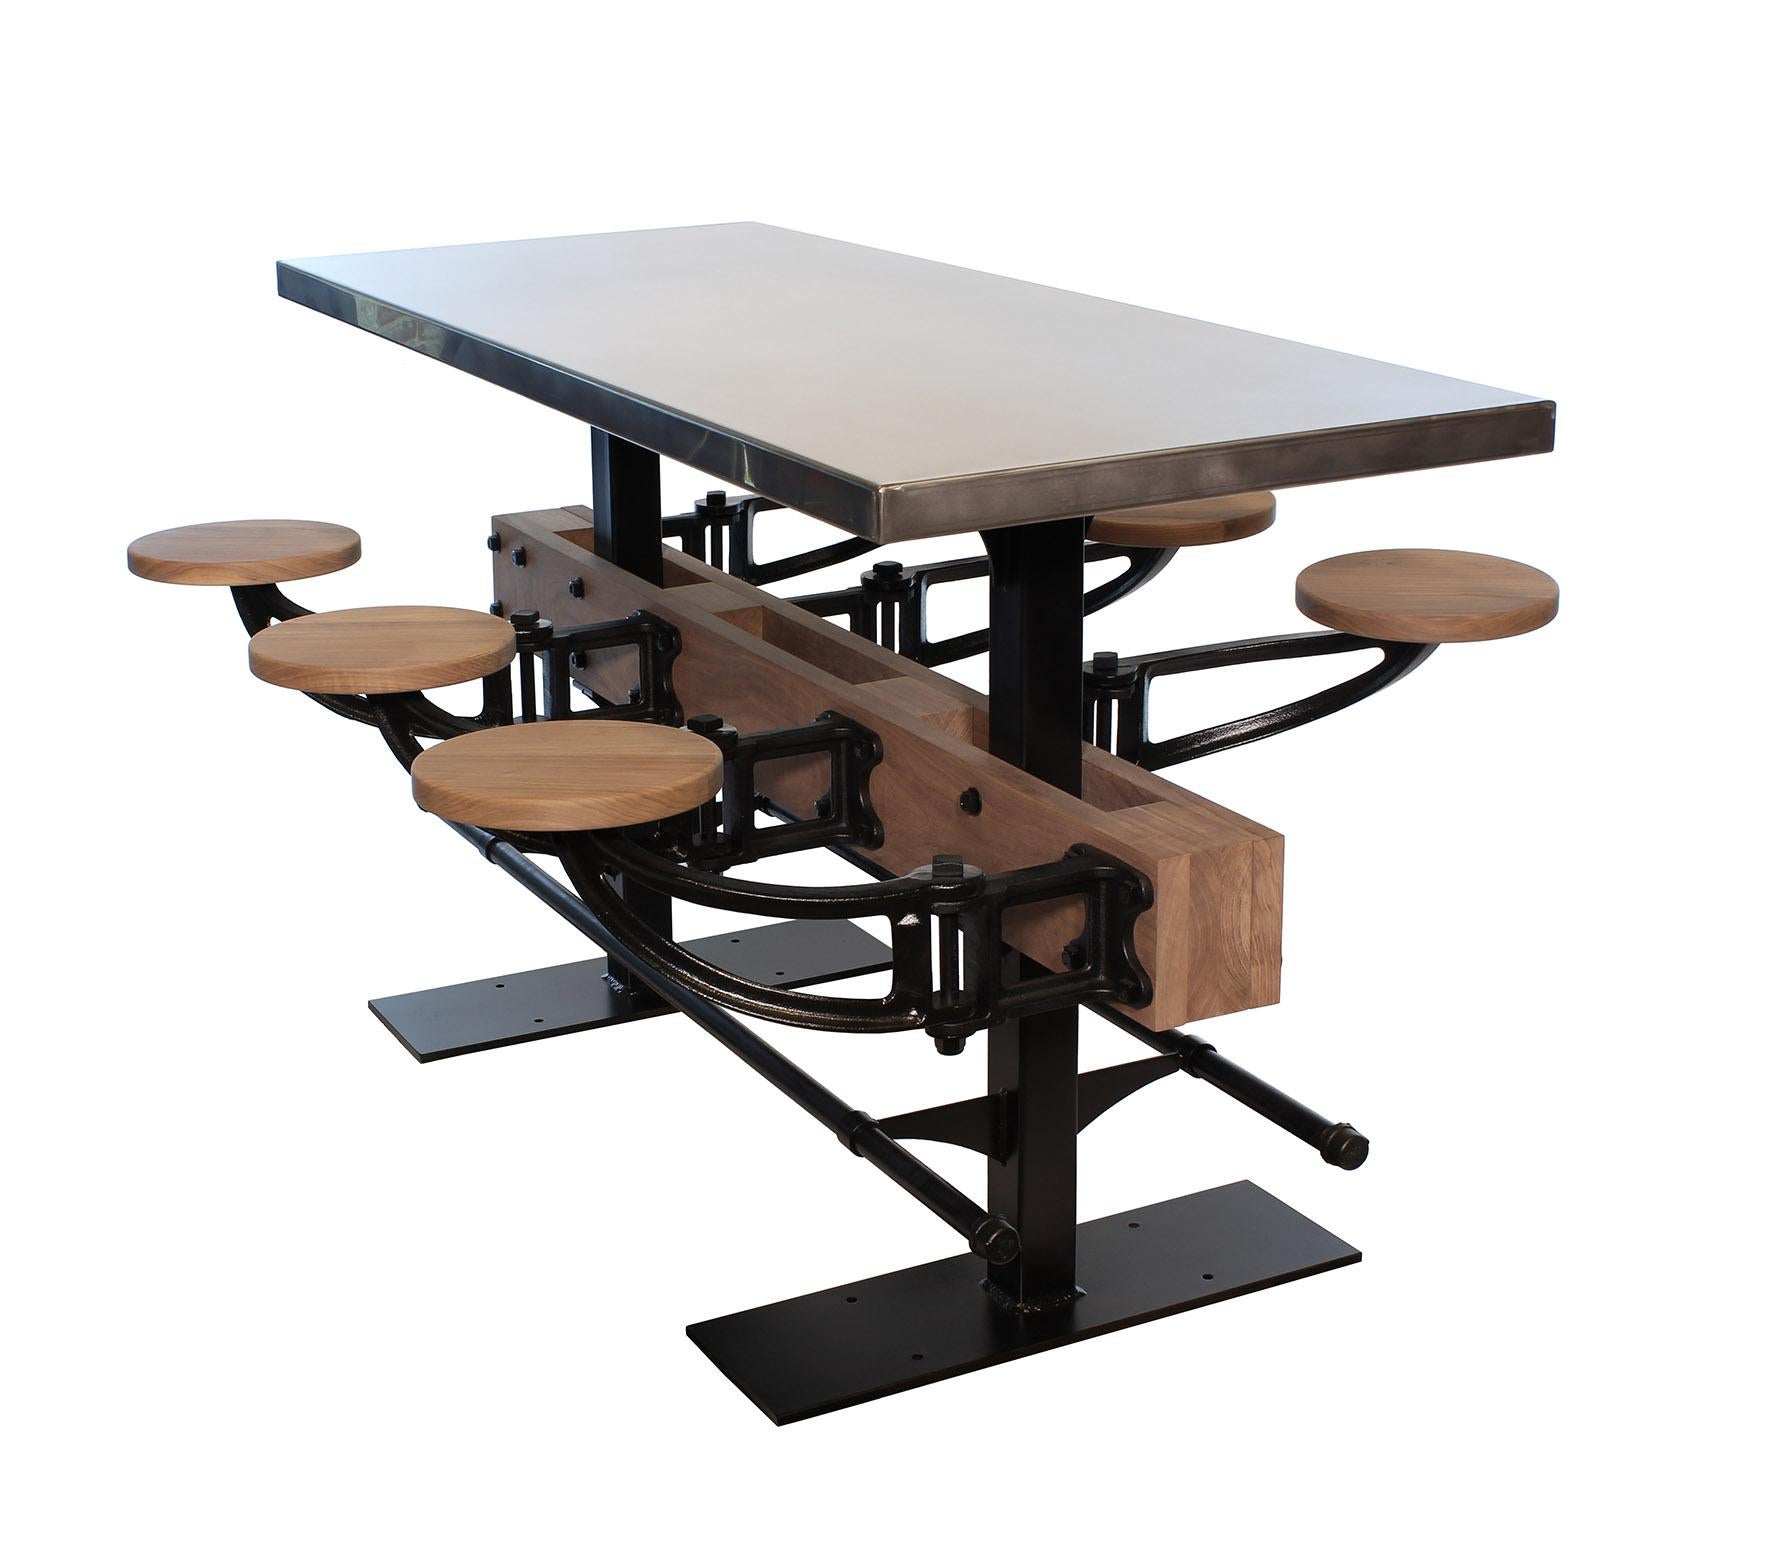 Custom built stainless steel pub height cafe table with cast-iron swing-out seats. Shown in 6-seat model in raw walnut with a foot-rail. Seat arms are cast from ductile iron and are stress tested to over 1000 pounds. Table shown measures 30